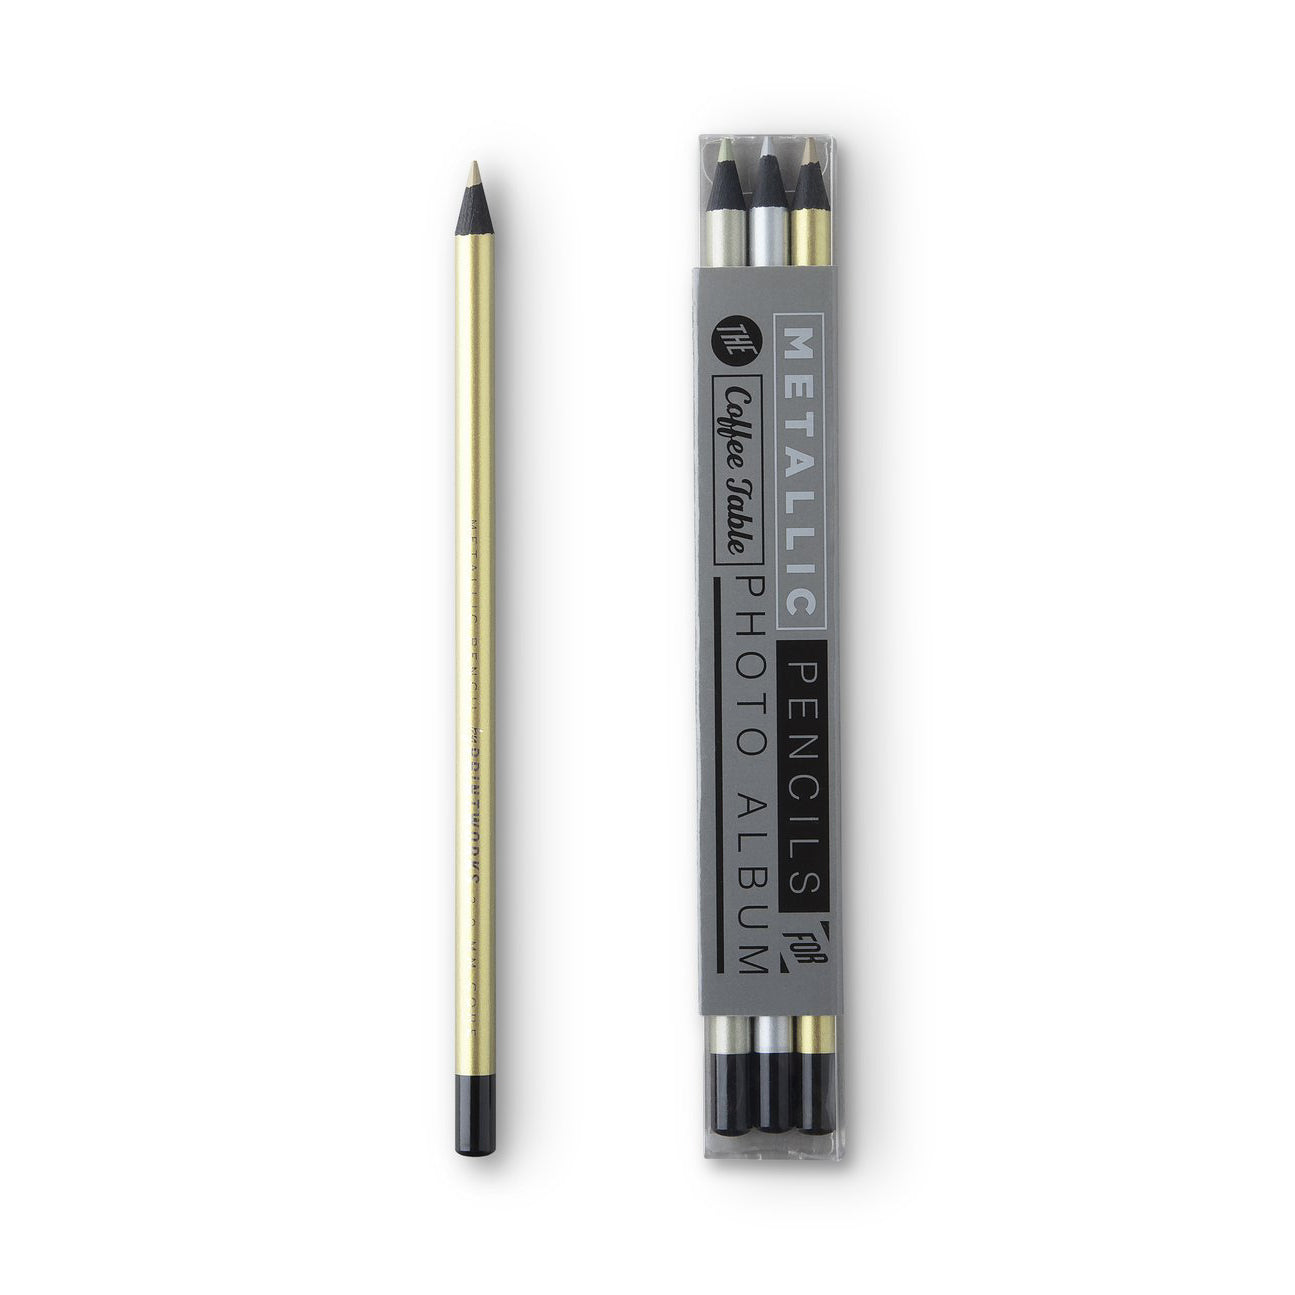 Metallic Pencils, 3-Pack for Photo Albums